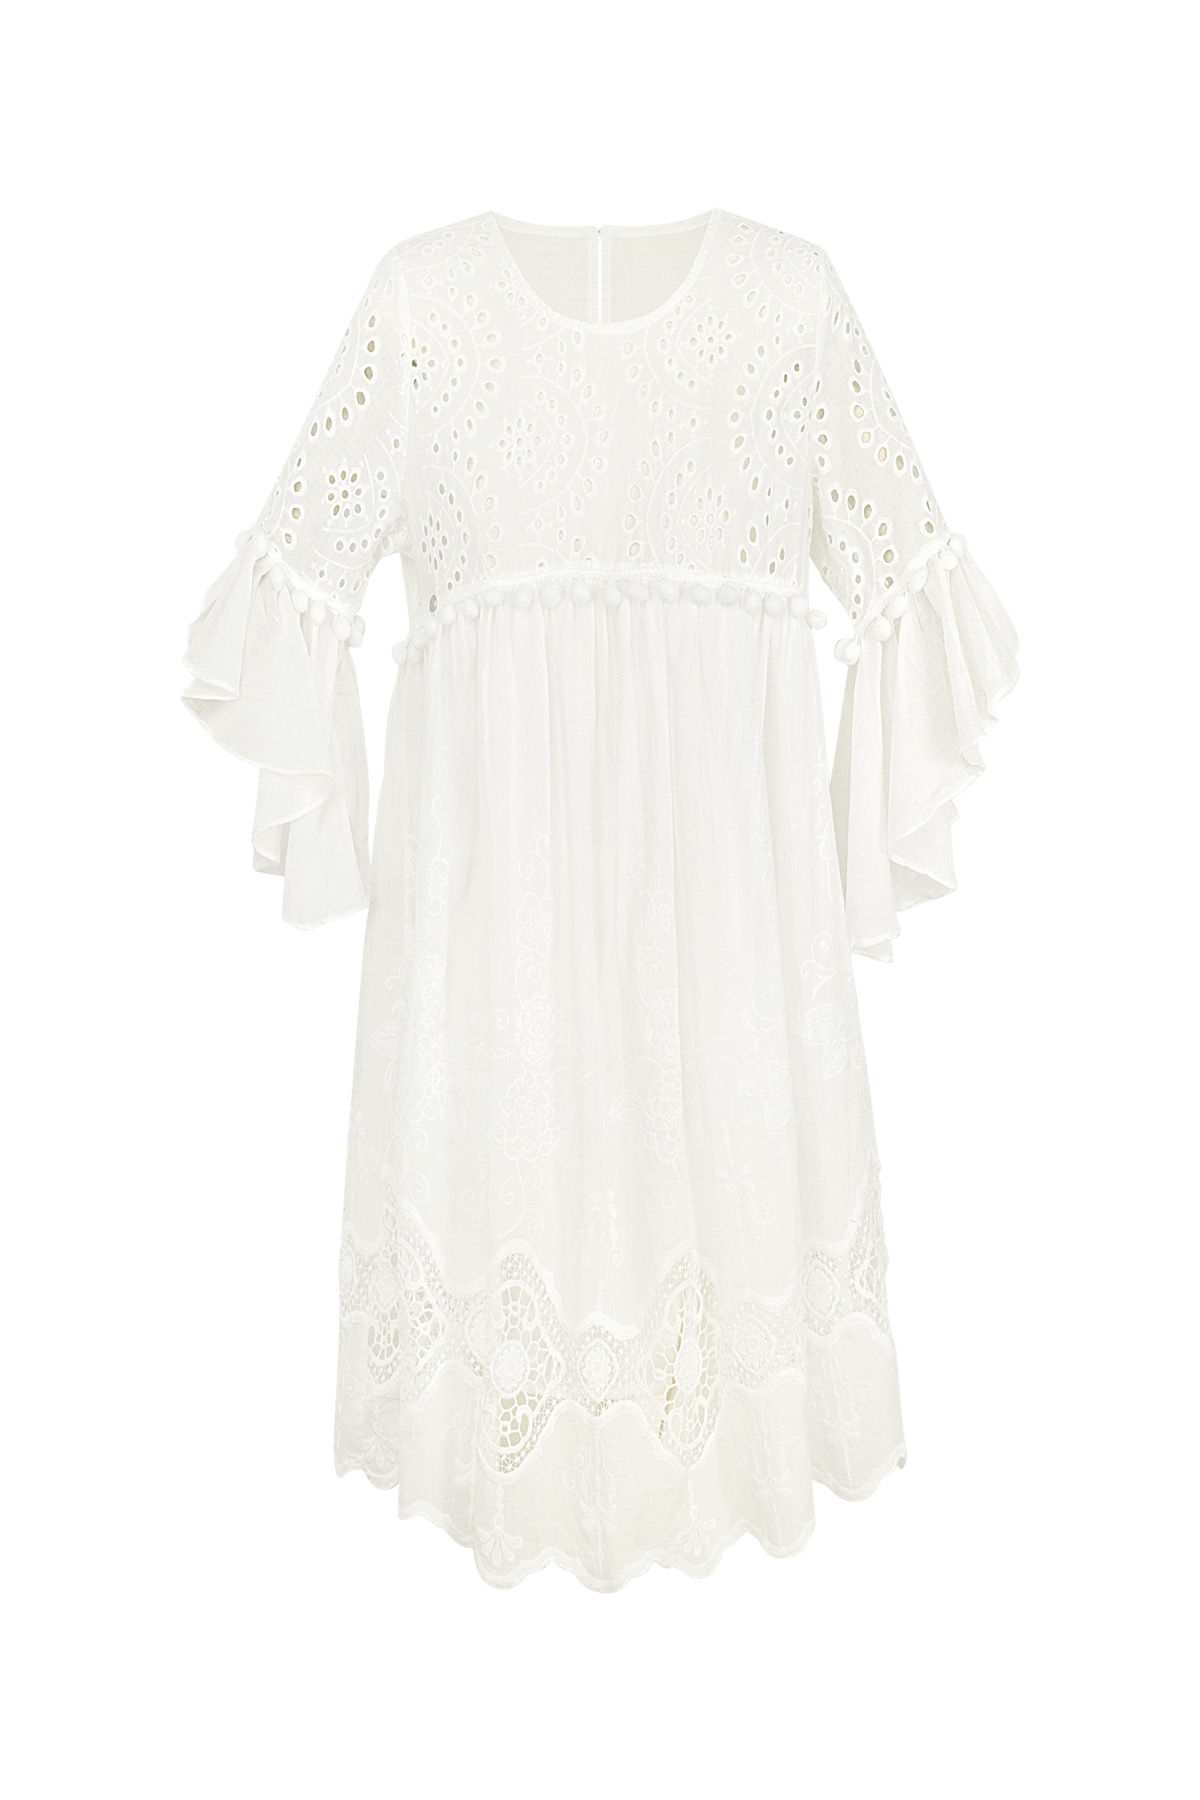 Dress embroidered details white